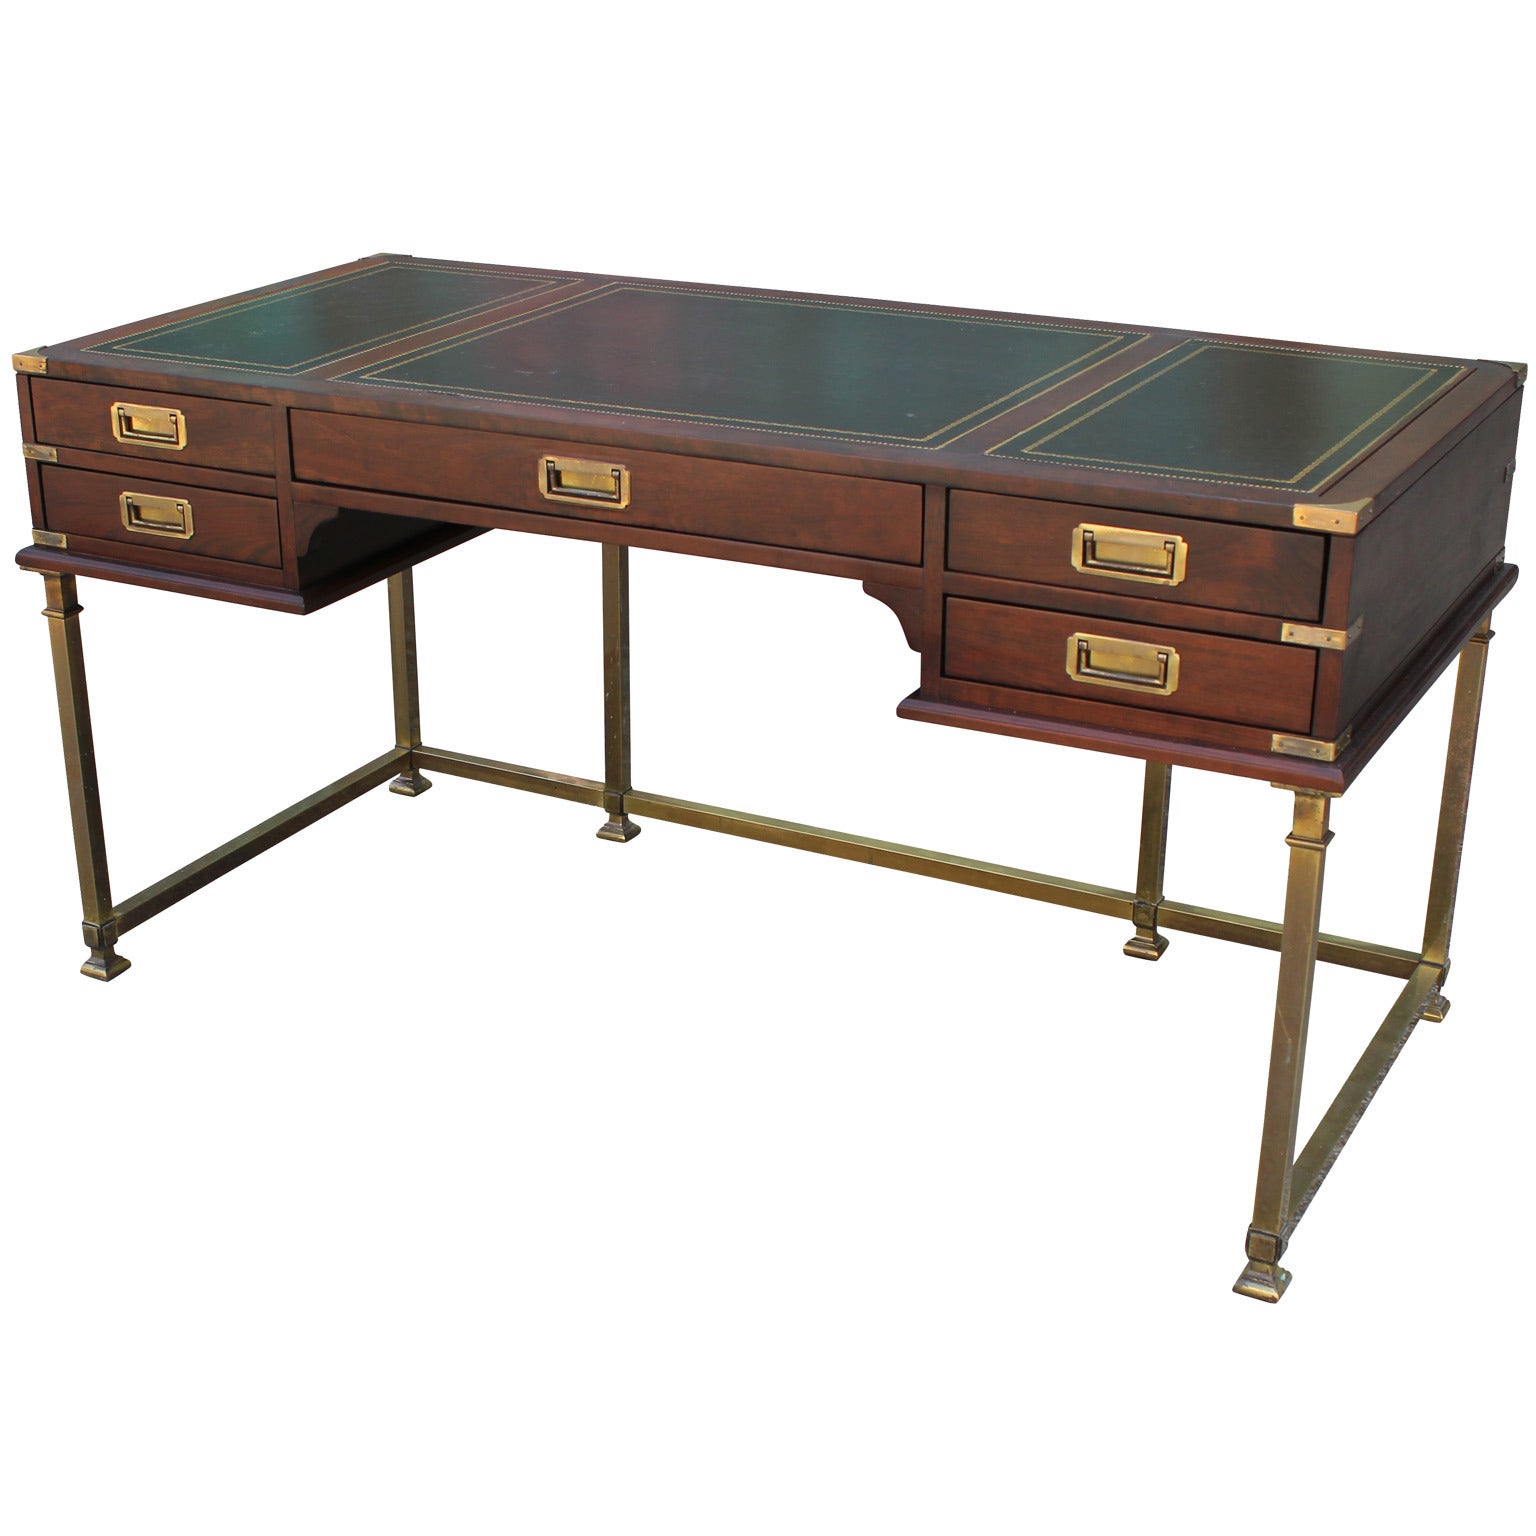 Excellent Campaign Style Desk with Brass Accents